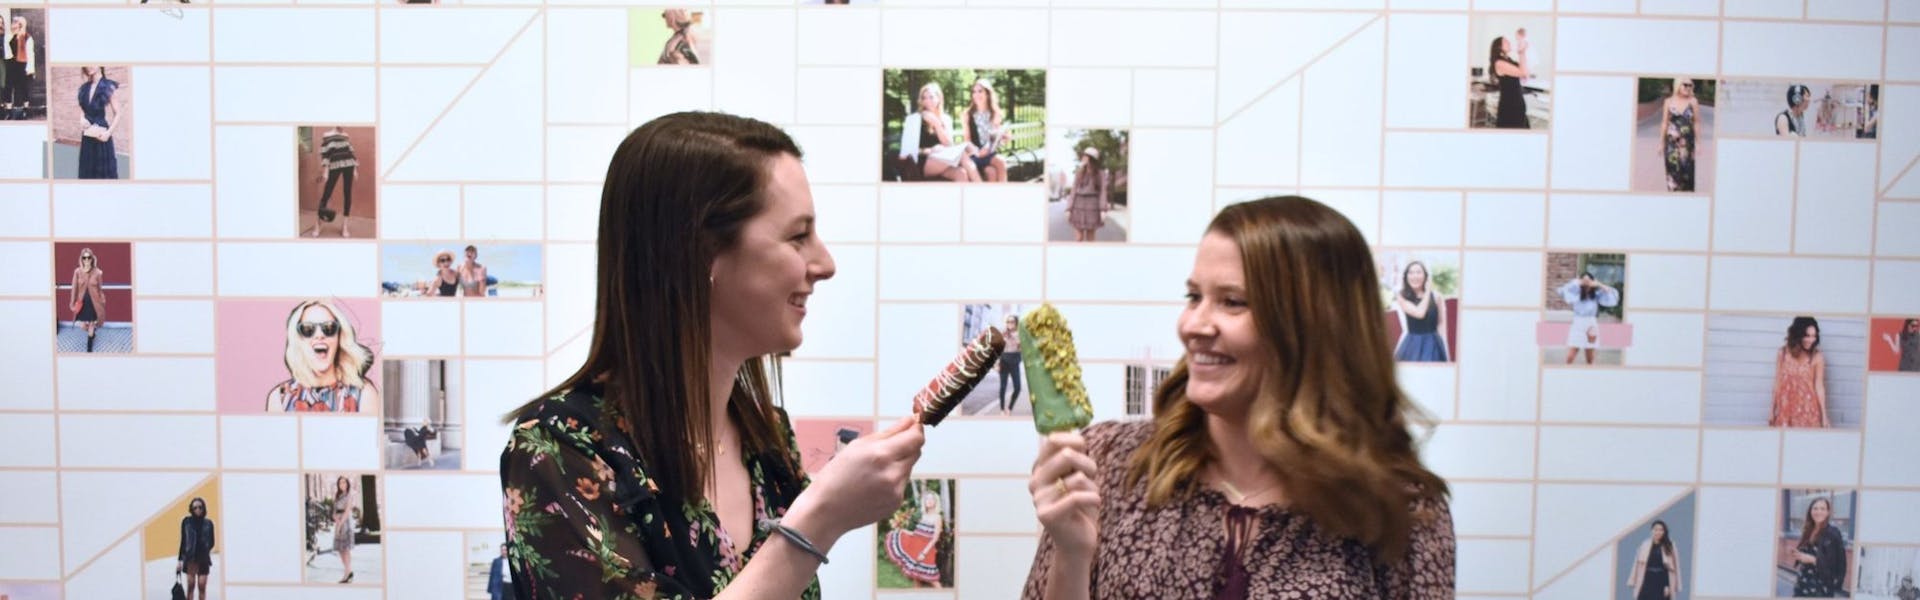 Champagne, Popsicles & Promotions: How Rent the Runway Celebrates its Employees